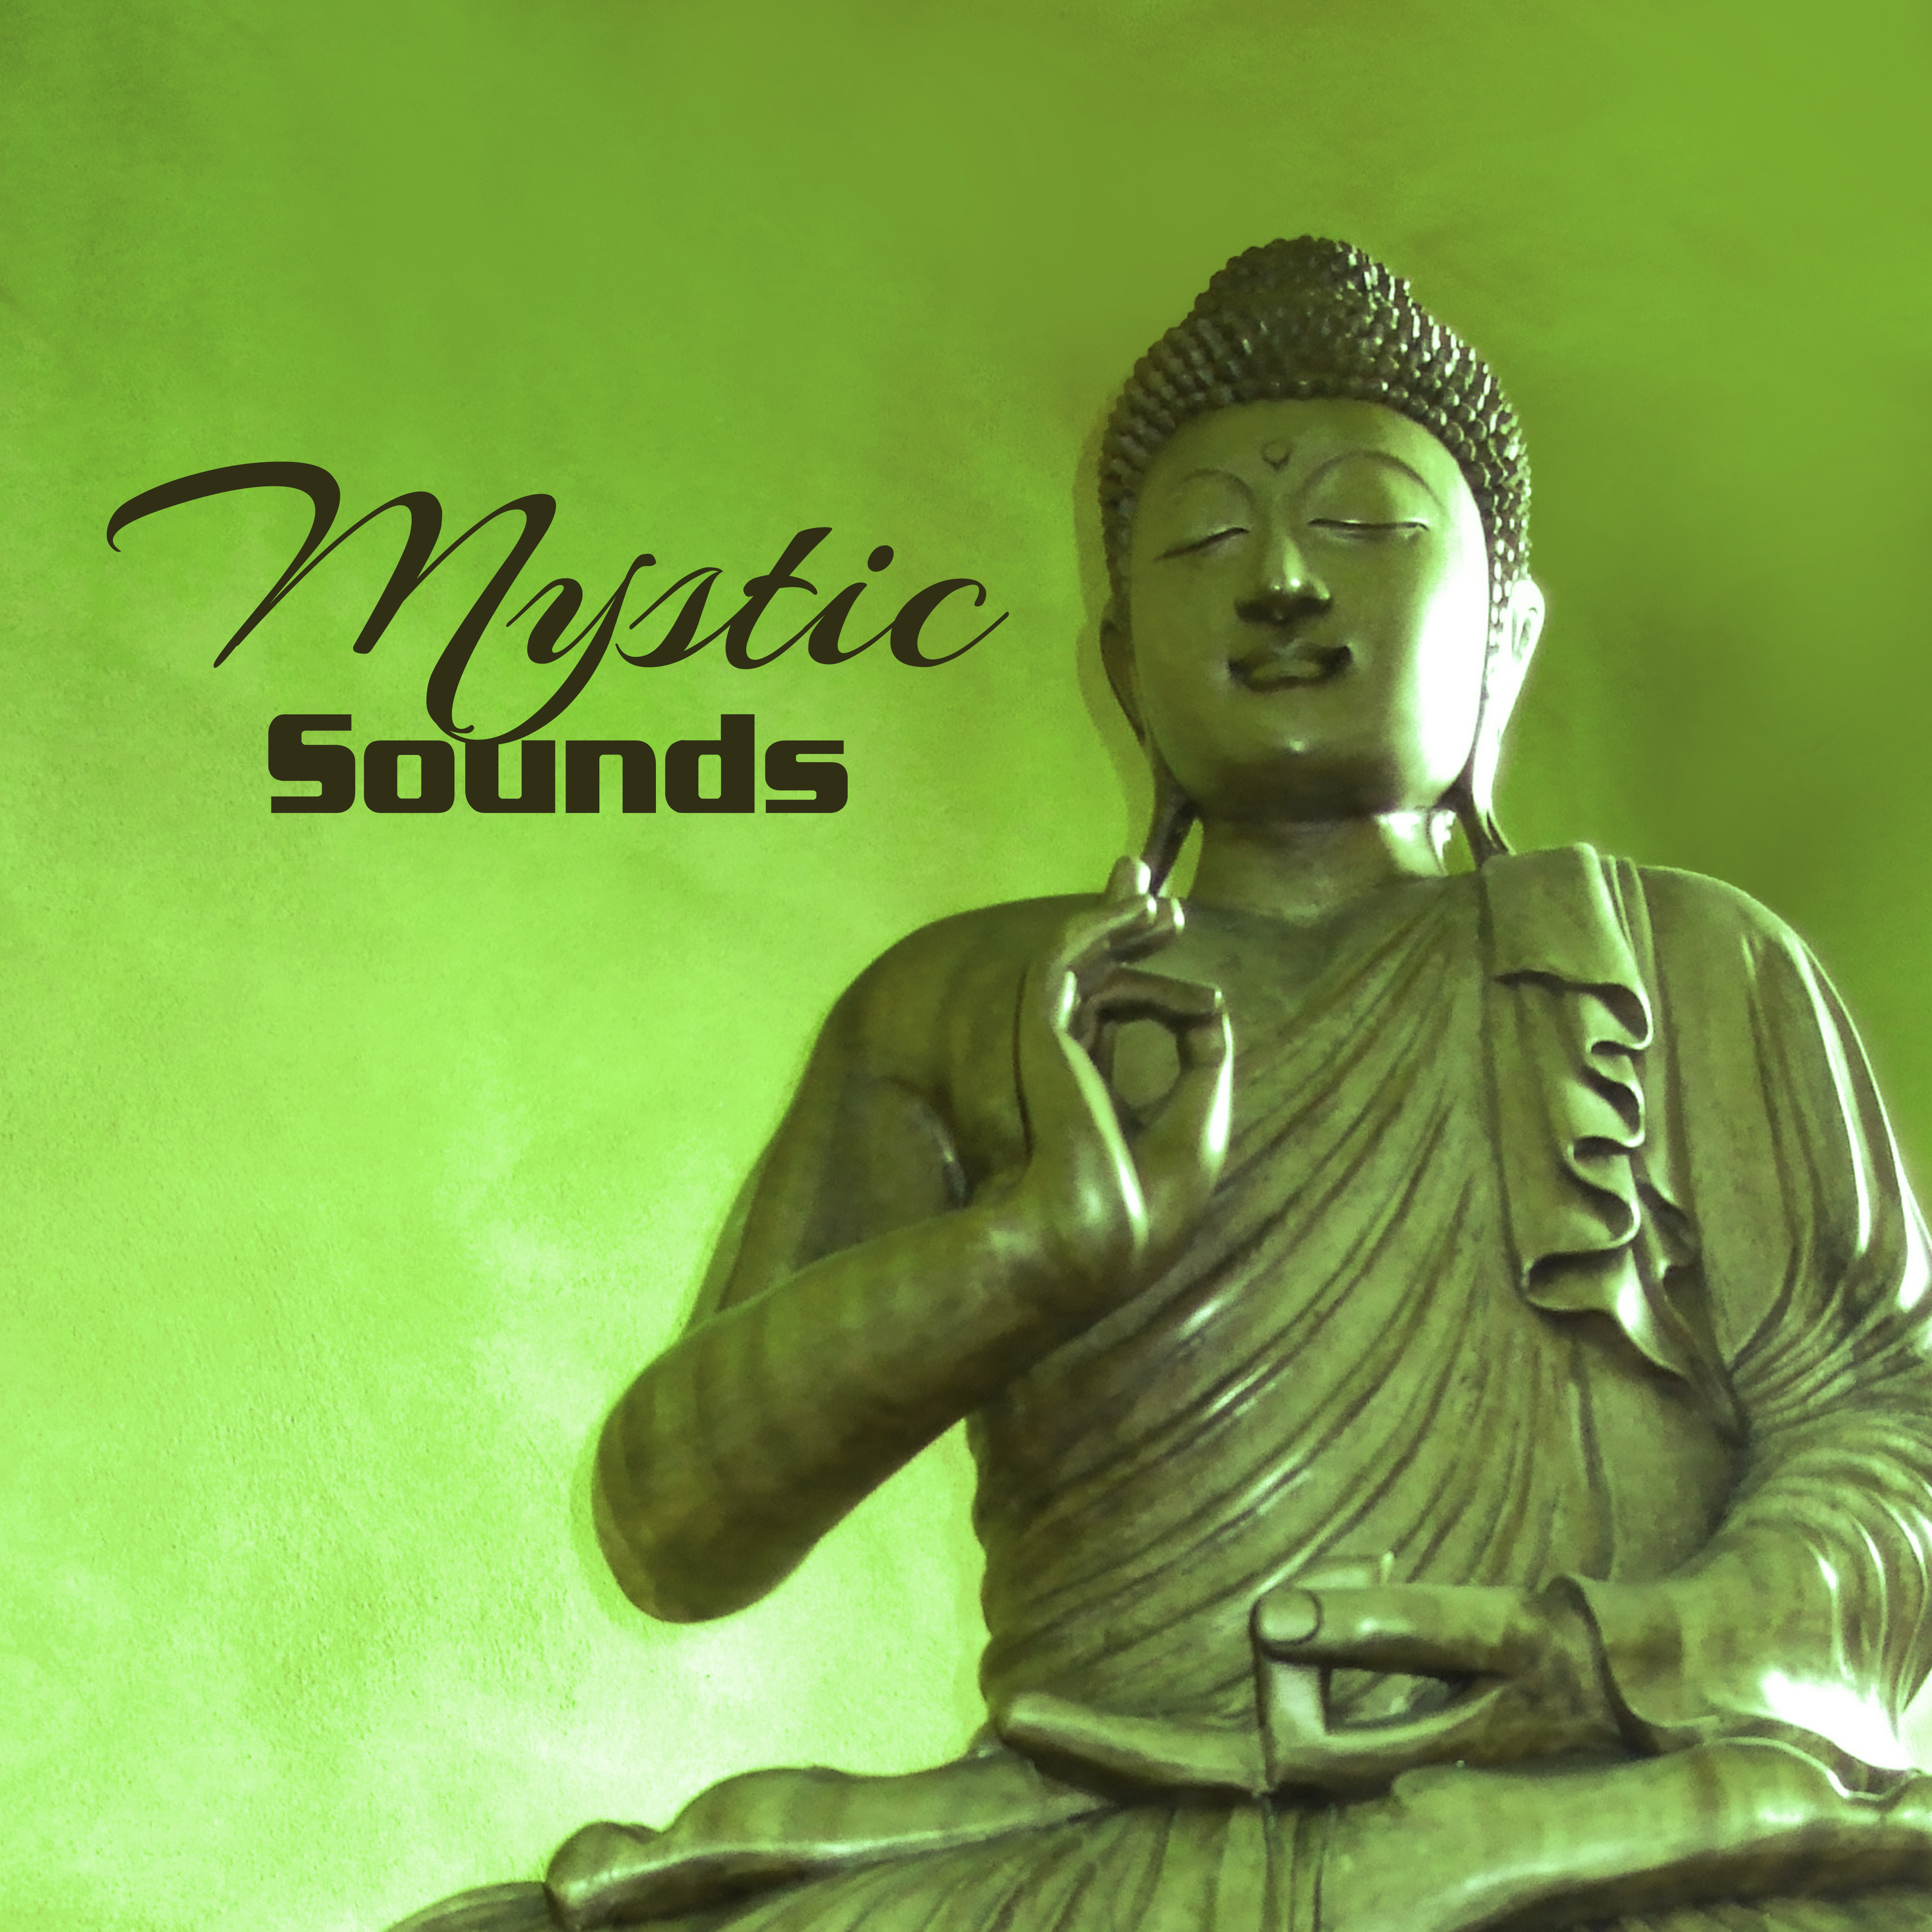 Mystic Sounds  Training Yoga, Soft Mindfulness, Relaxing Therapy for Mind, Deep Meditation, Music to Concentrate, Reiki Energy, Kundalini, Nature Sounds